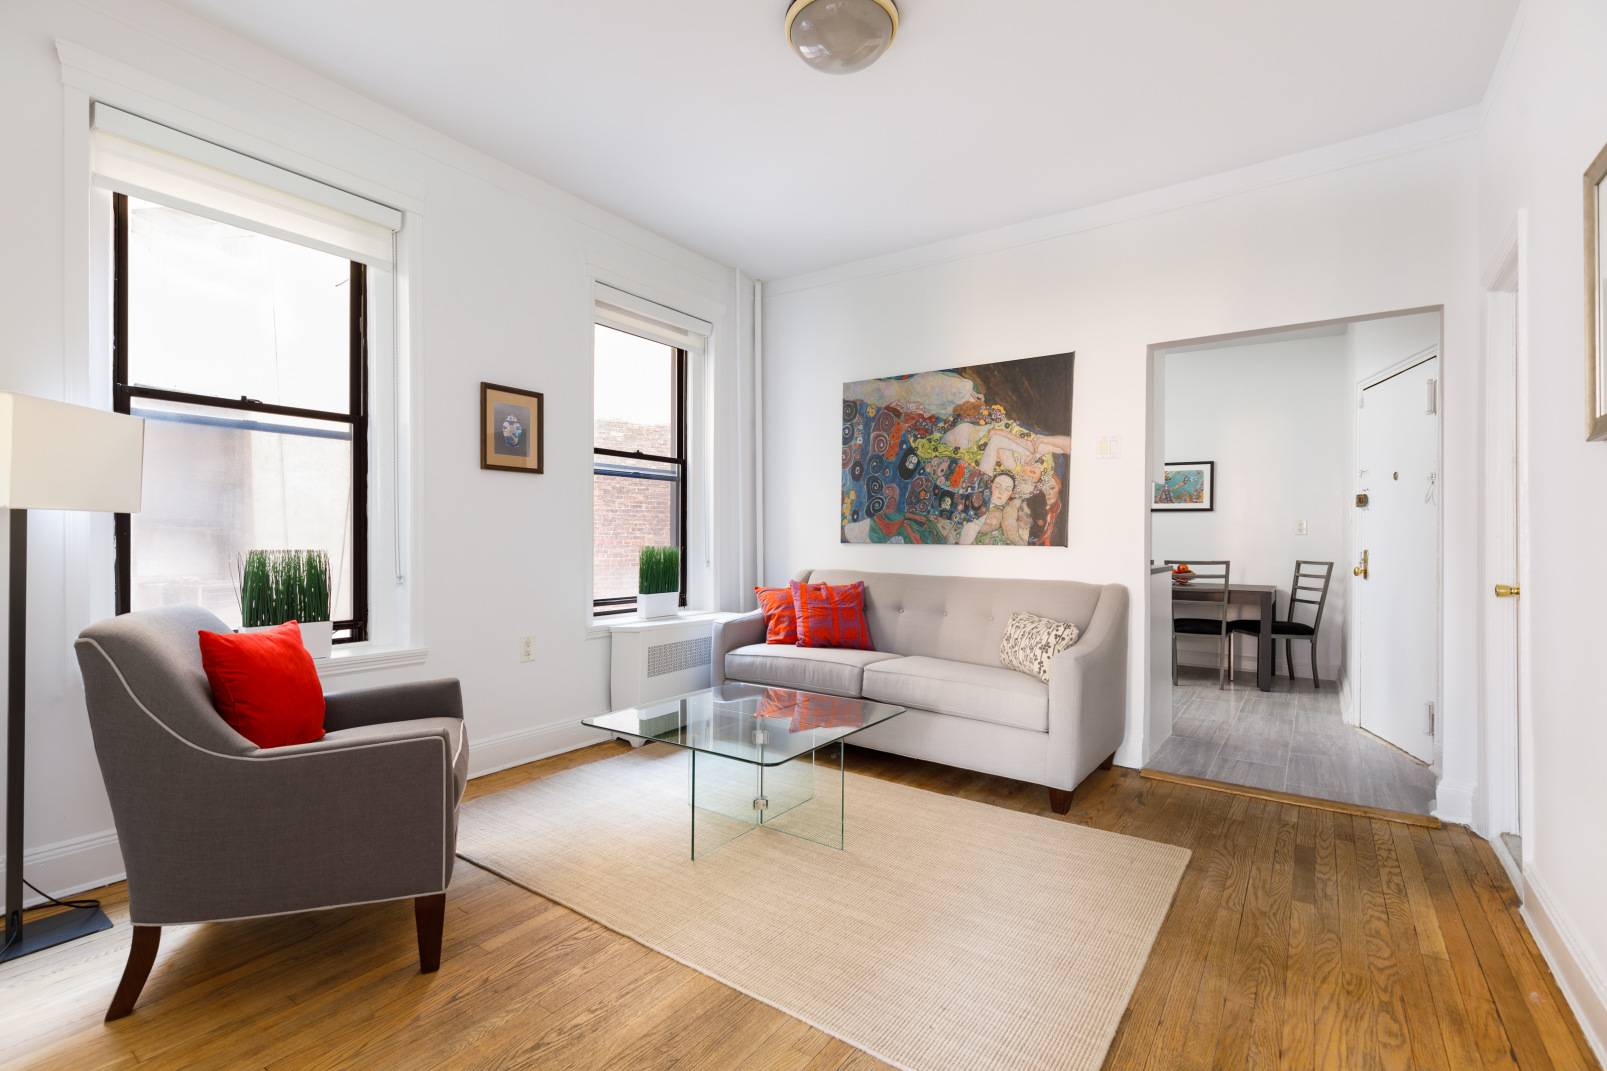 Move right into this newly renovated two bedroom coop that conveniently straddles Park Slope and Prospect Heights.